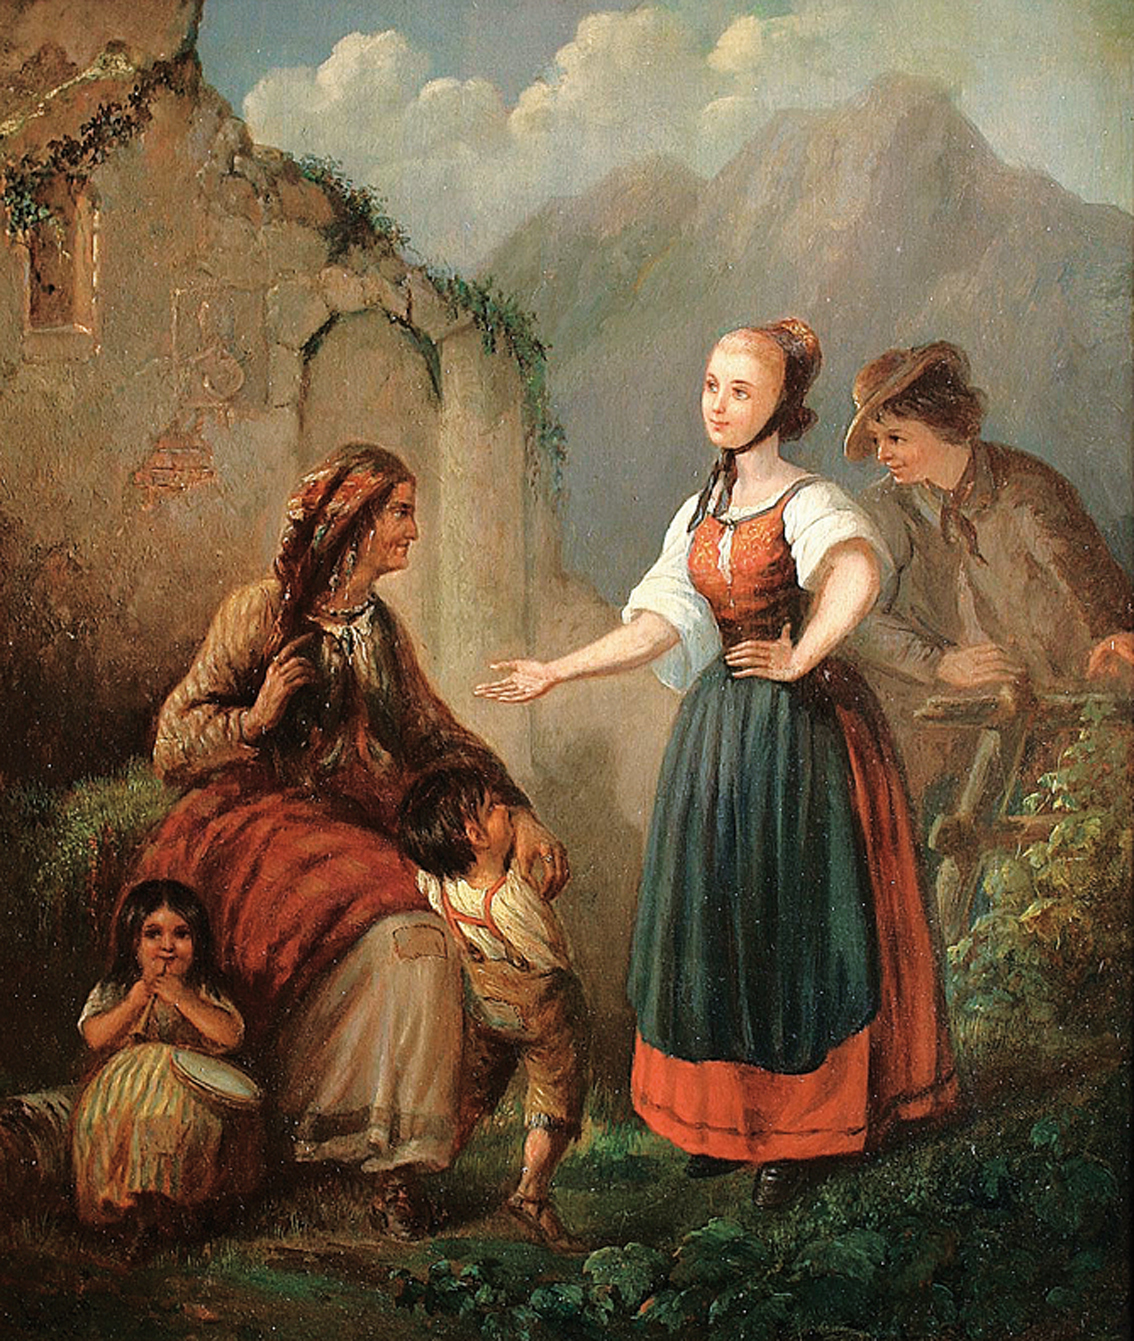 "A visit at the Cassandra or fortune teller in the mountains"